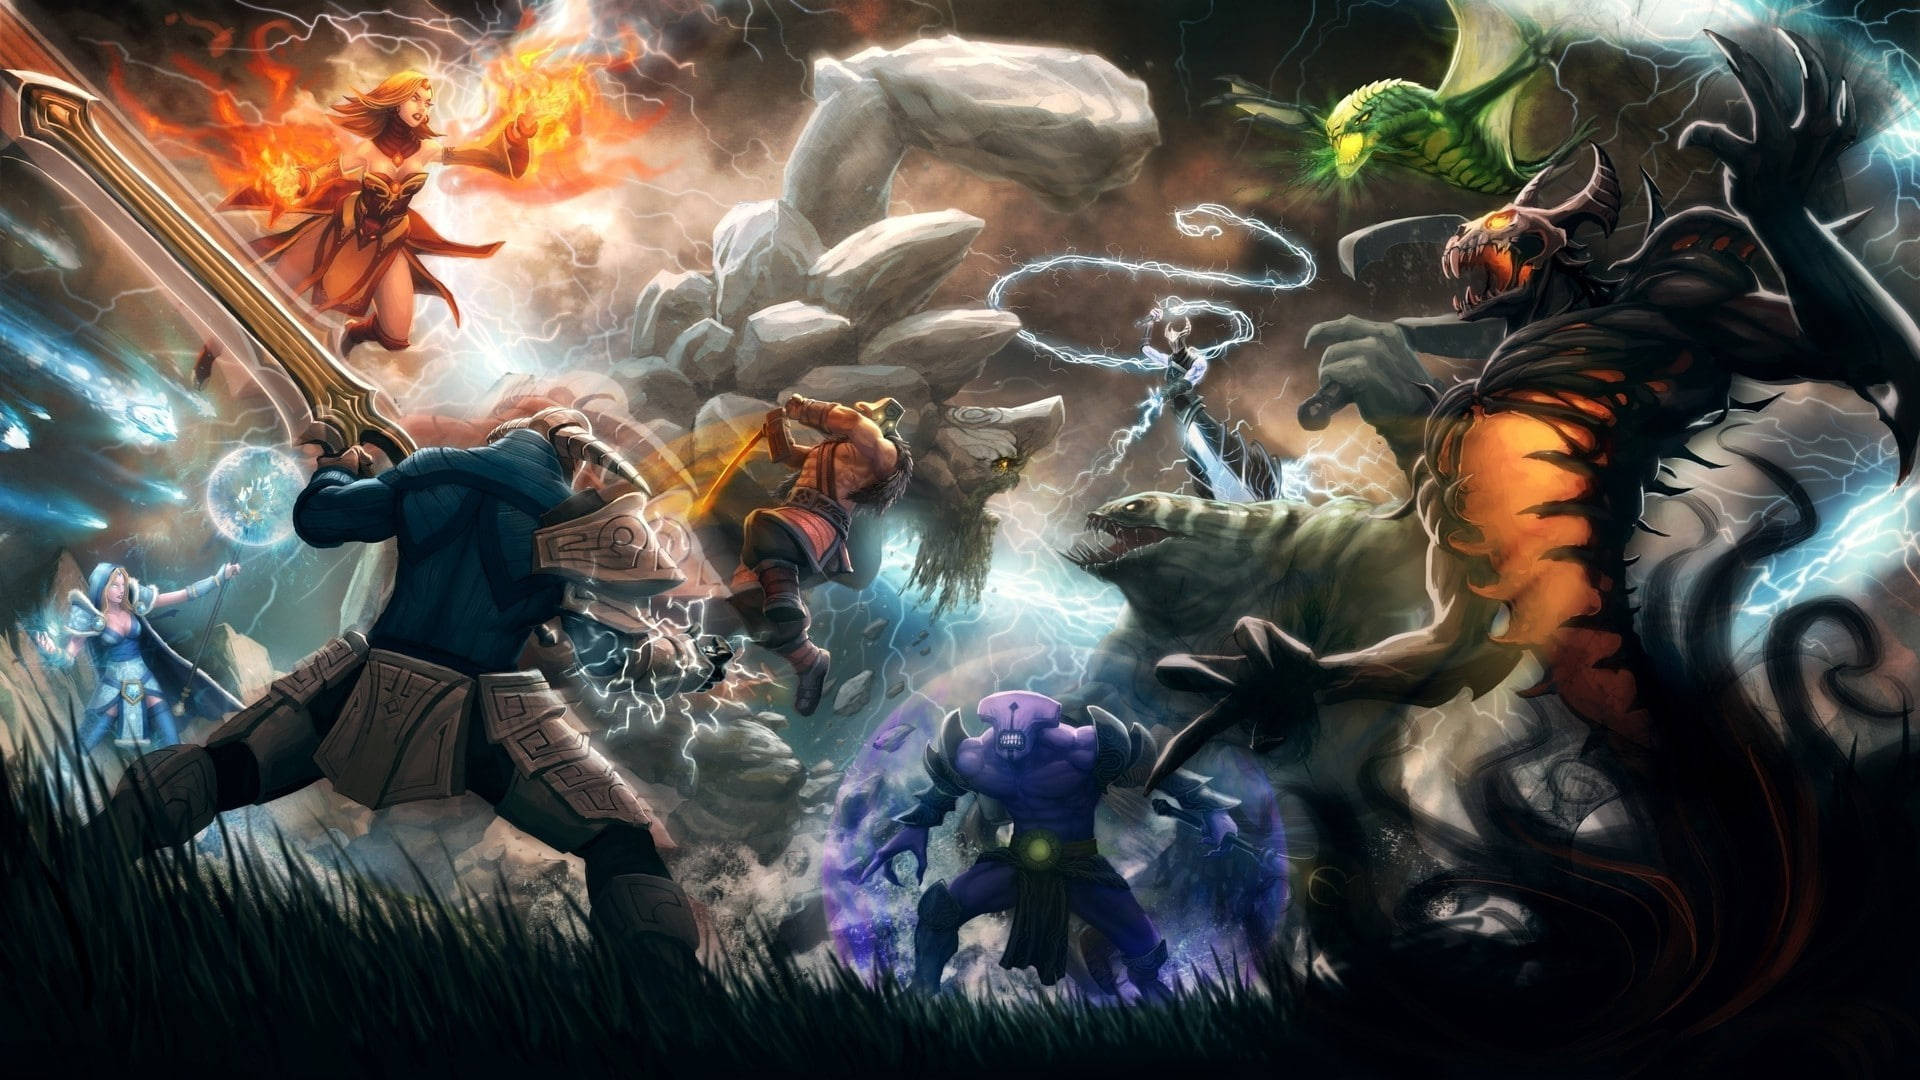 Control The Fate Of Battle On Your Desktop With Dota 2 Wallpaper